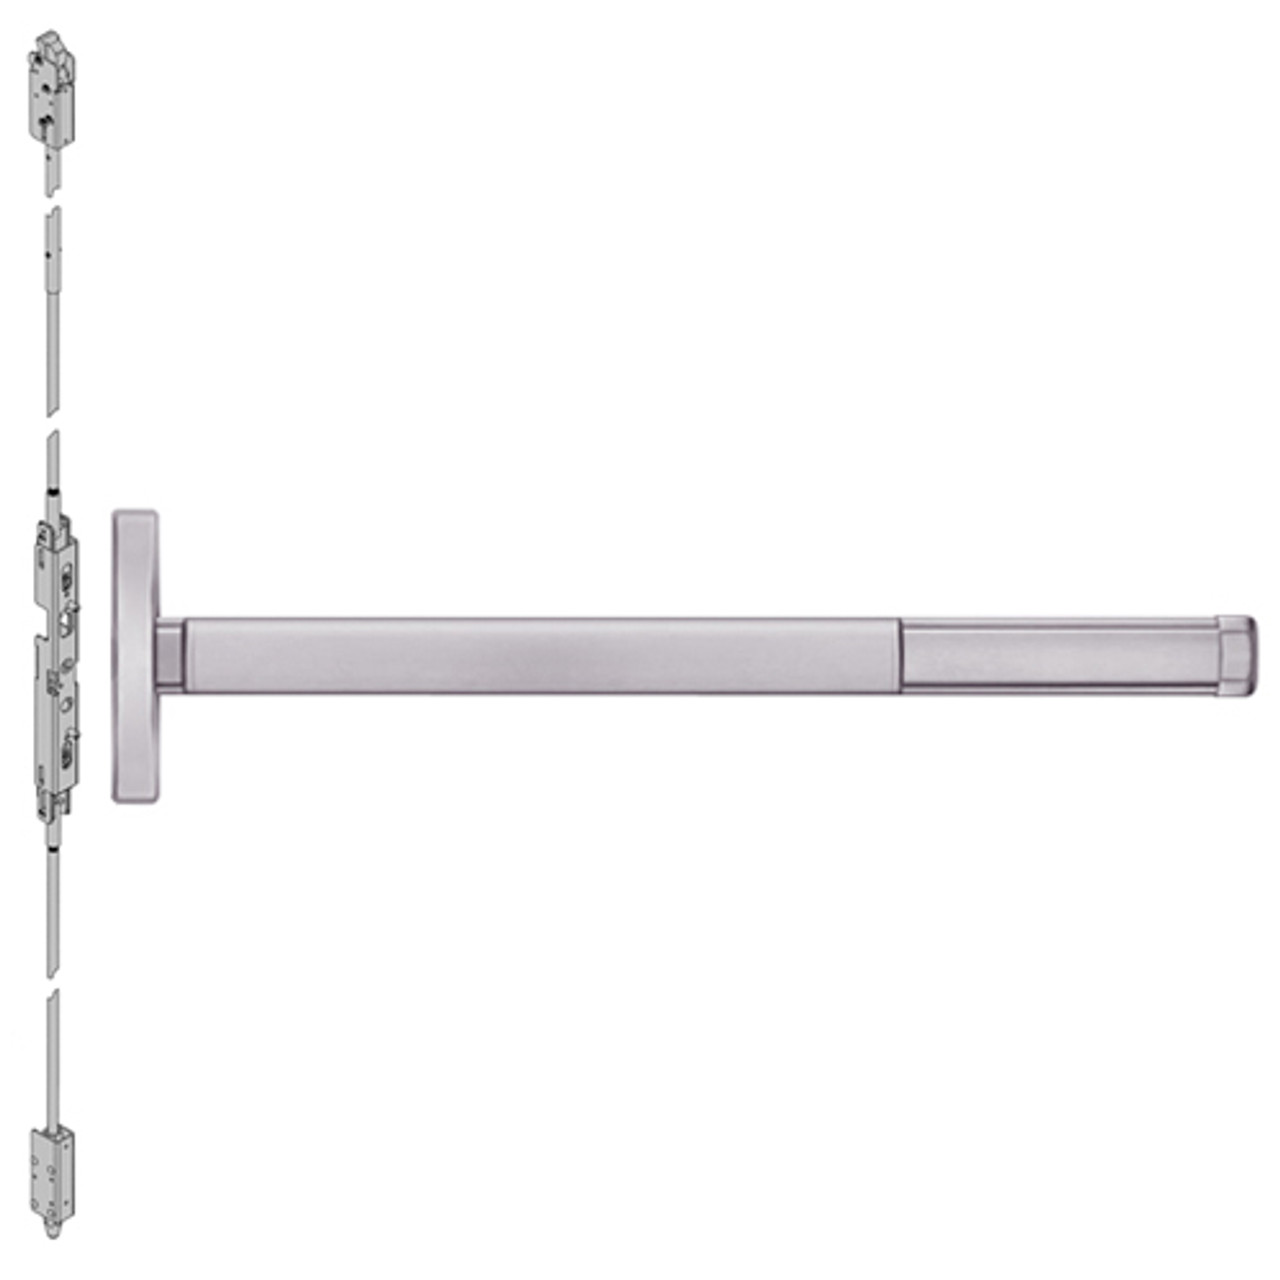 ELR2614-630-48 PHI 2600 Series Concealed Vertical Rod Exit Device with Electric Latch Retraction Prepped for Lever Always Active in Satin Stainless Steel Finish